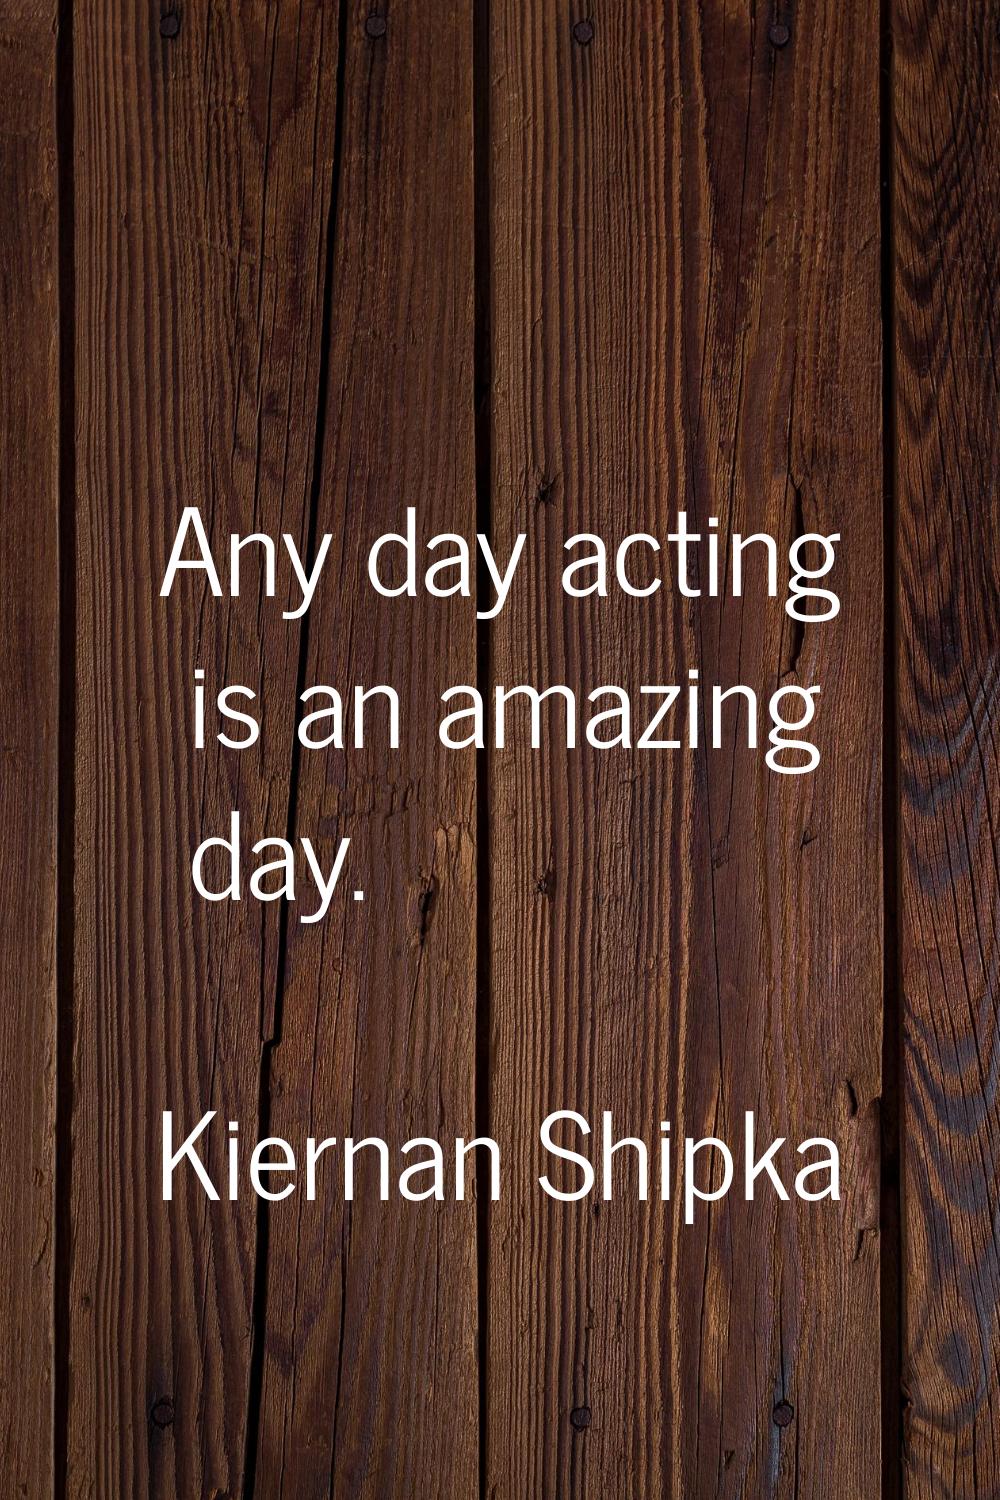 Any day acting is an amazing day.